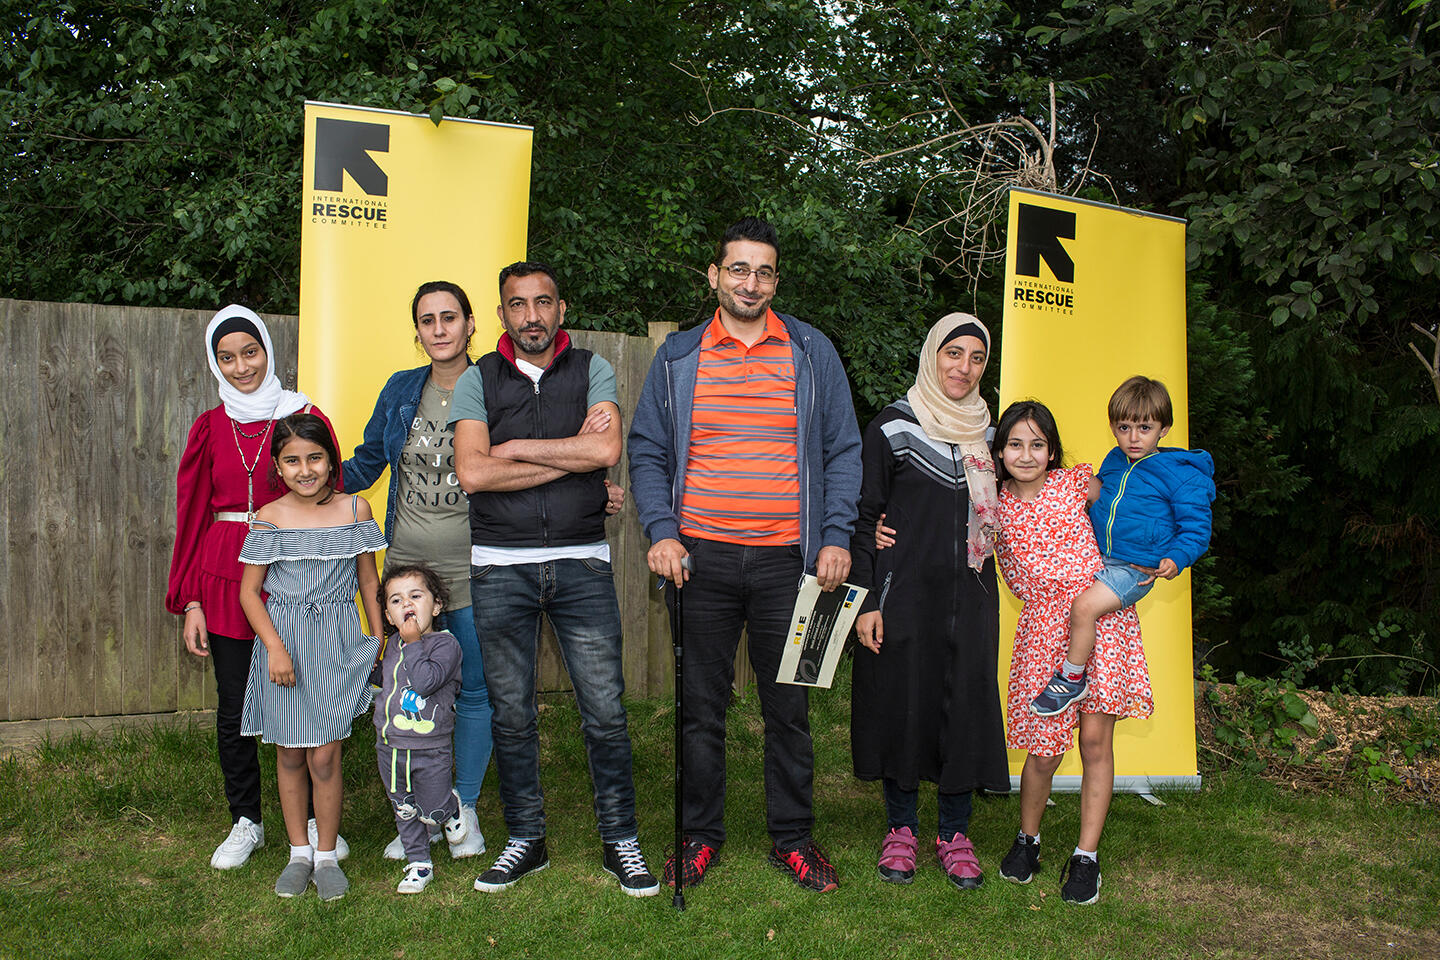 Two families pose together at the first IRC RISE graduation in Horsham, UK.